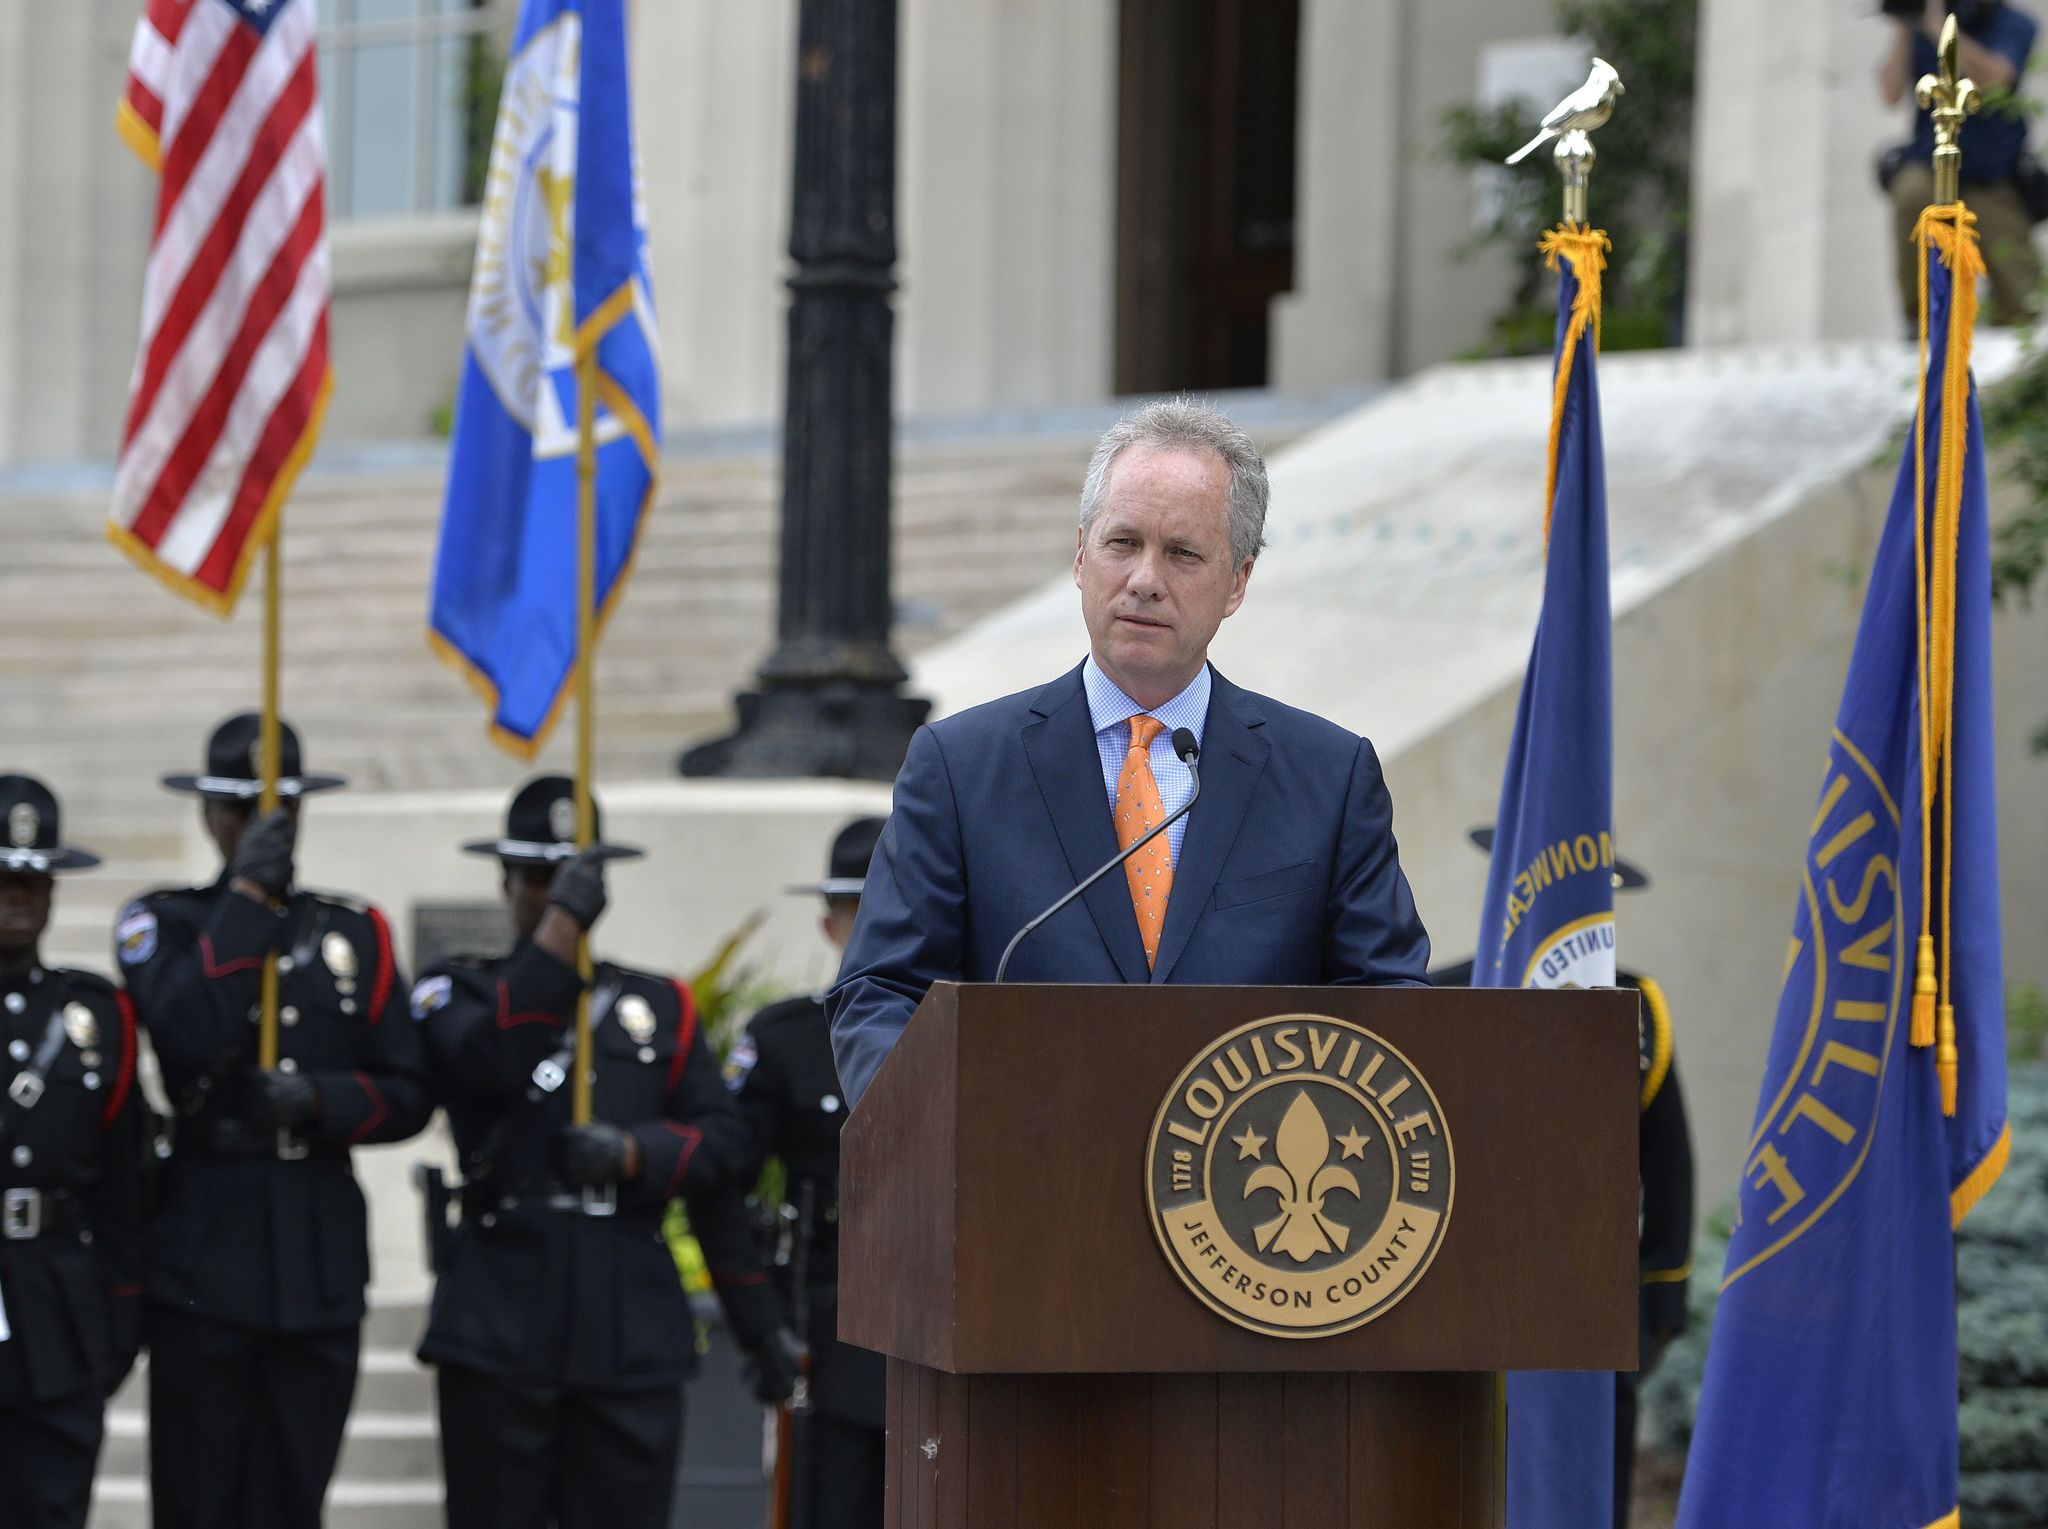 With the Metro Police Color Guard standing at attention, Louisville Mayor Greg Fisher addresses a gathering of supporters and mourners of Muhammad Ali from the steps of the Louisville City Hall on Saturday in Louisville Kentucky.